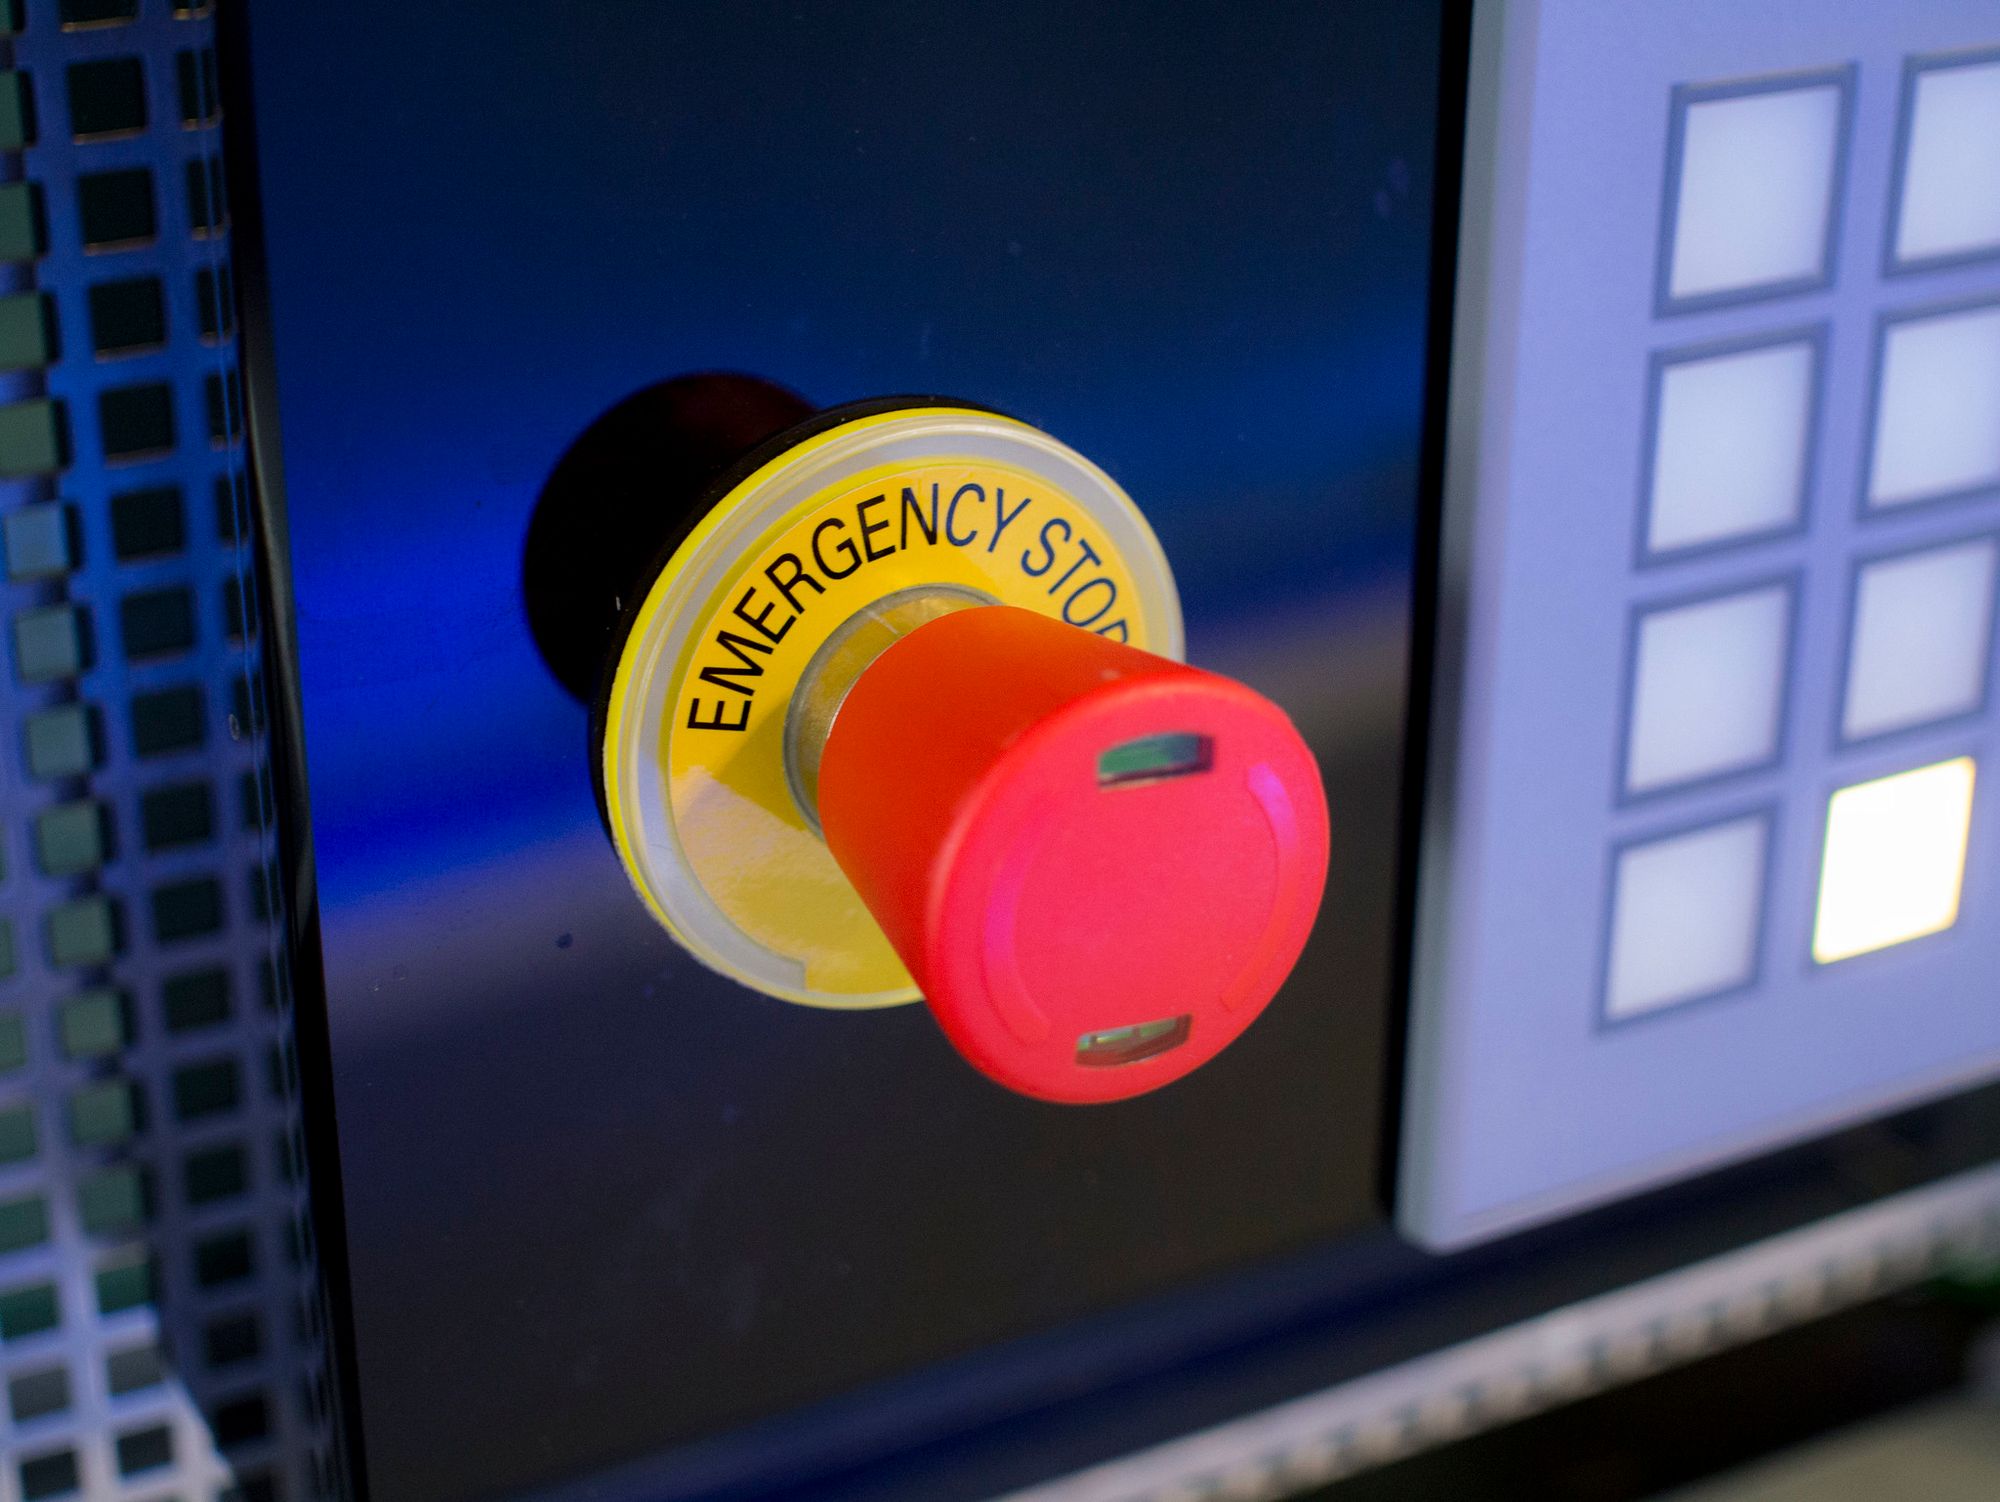 A big red button with the words "emergency stop" visible around the base